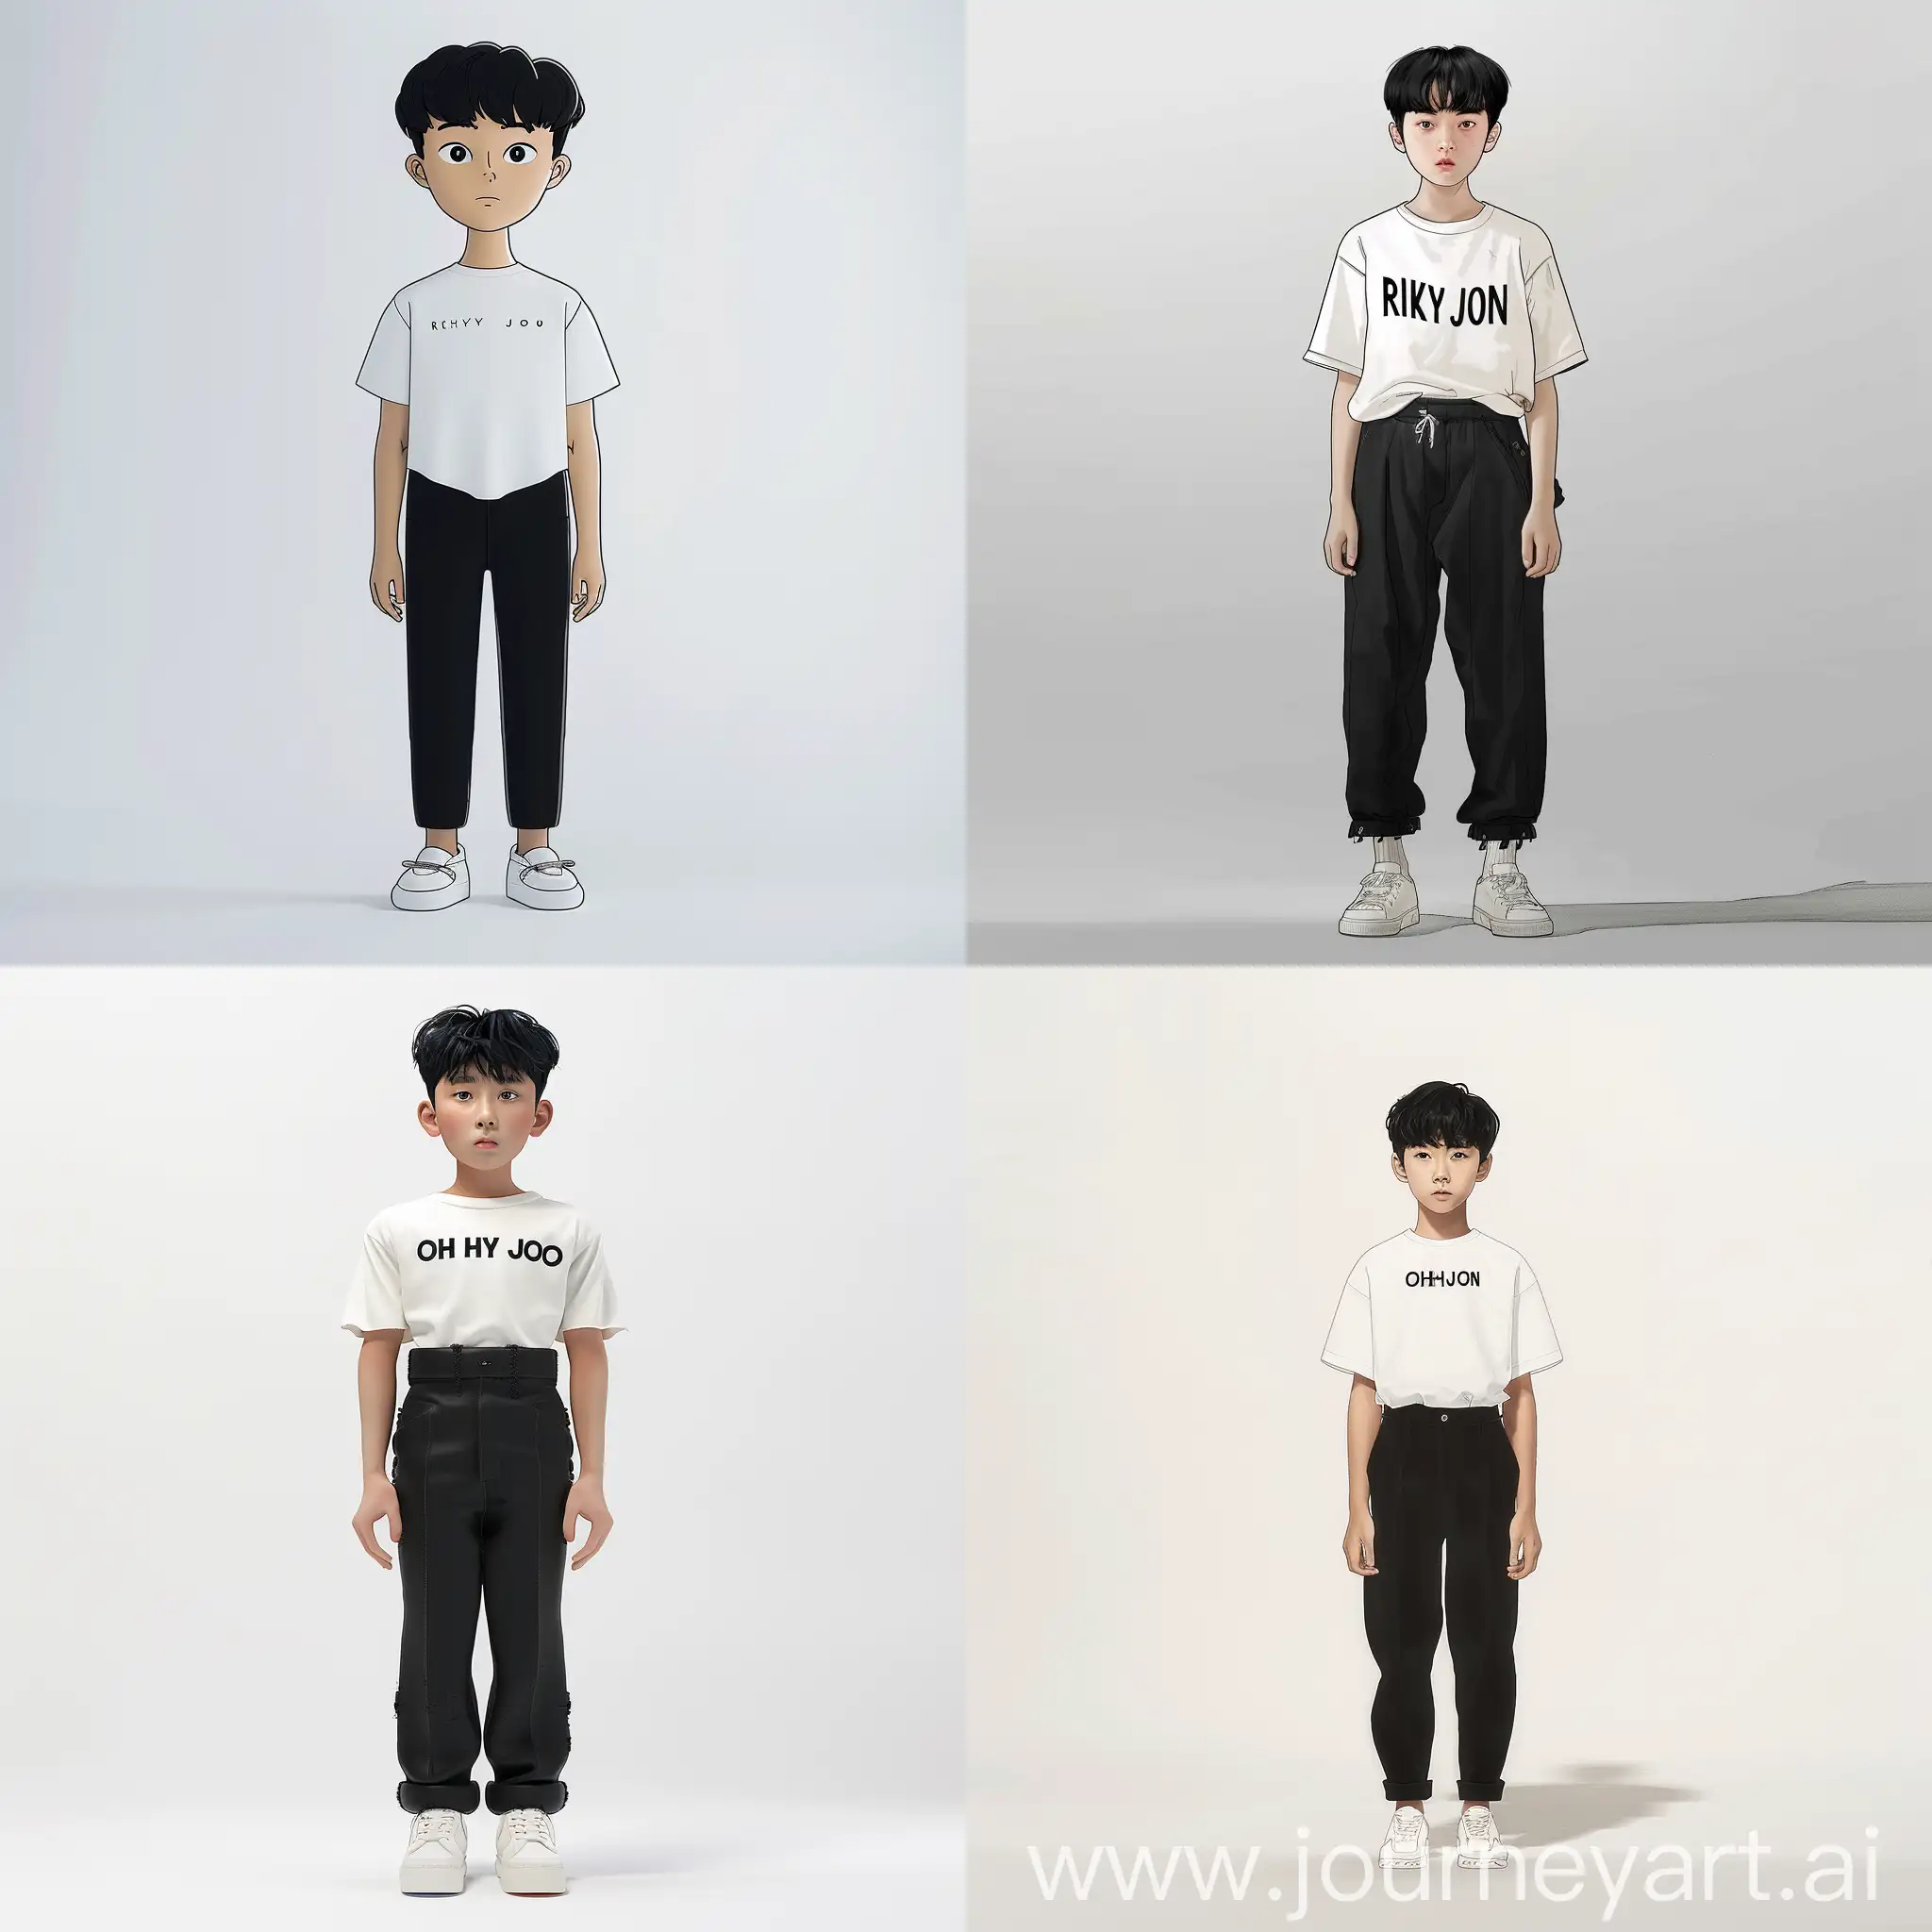 This is a Korean 14-year-old Oh Hyun-joon children's character creation. Background is white, height is 161cm, boy, hair is black, top is white T-shirt, Rick Owens,pants are black, shoes are white sneakers. Please draw a picture with the above content in a full-shot live-action format